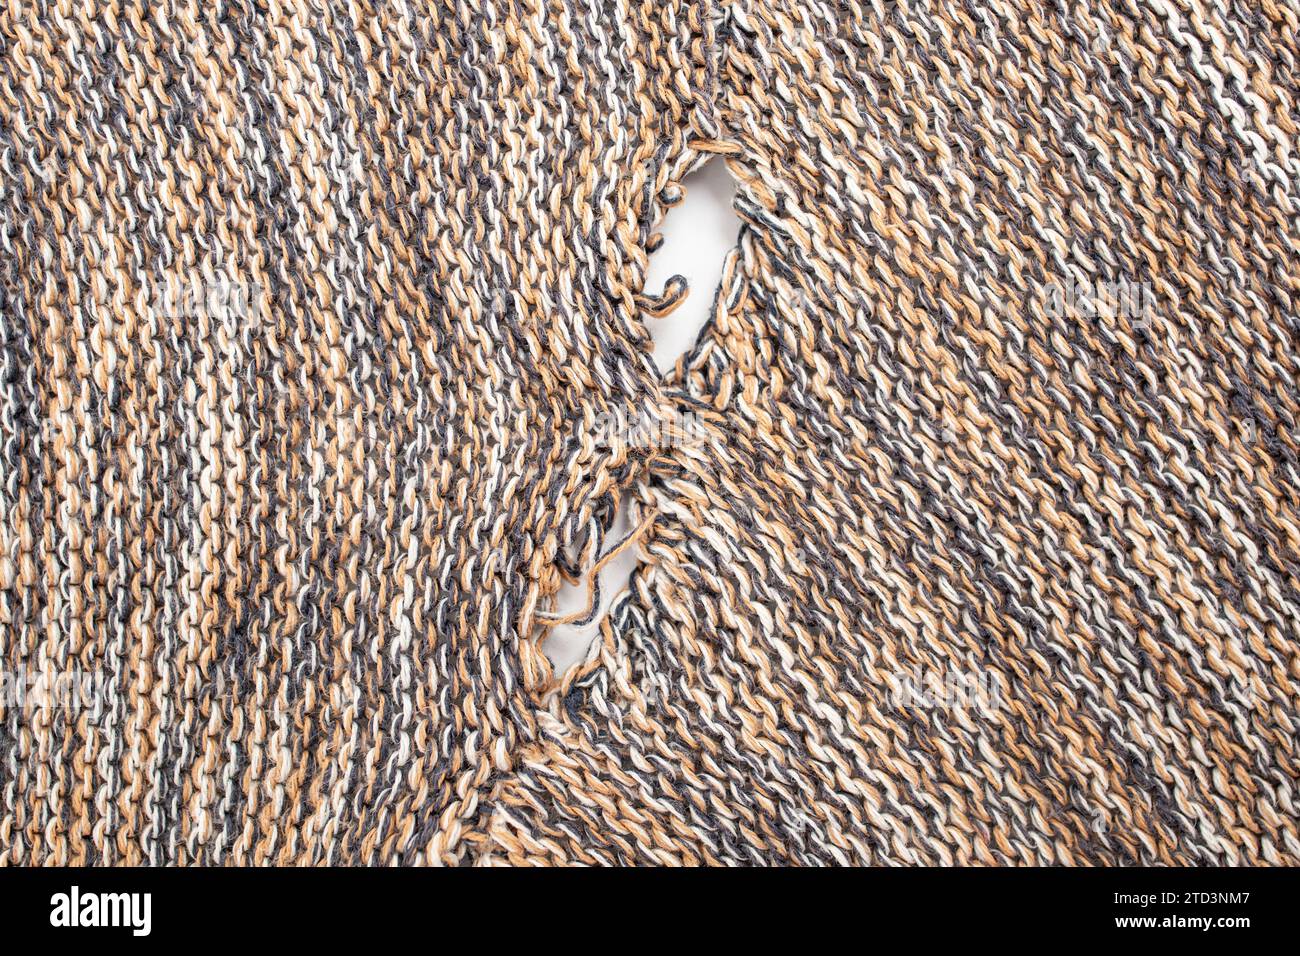 ripped pullover fabric that needs repair, repurposing concept, close up Stock Photo